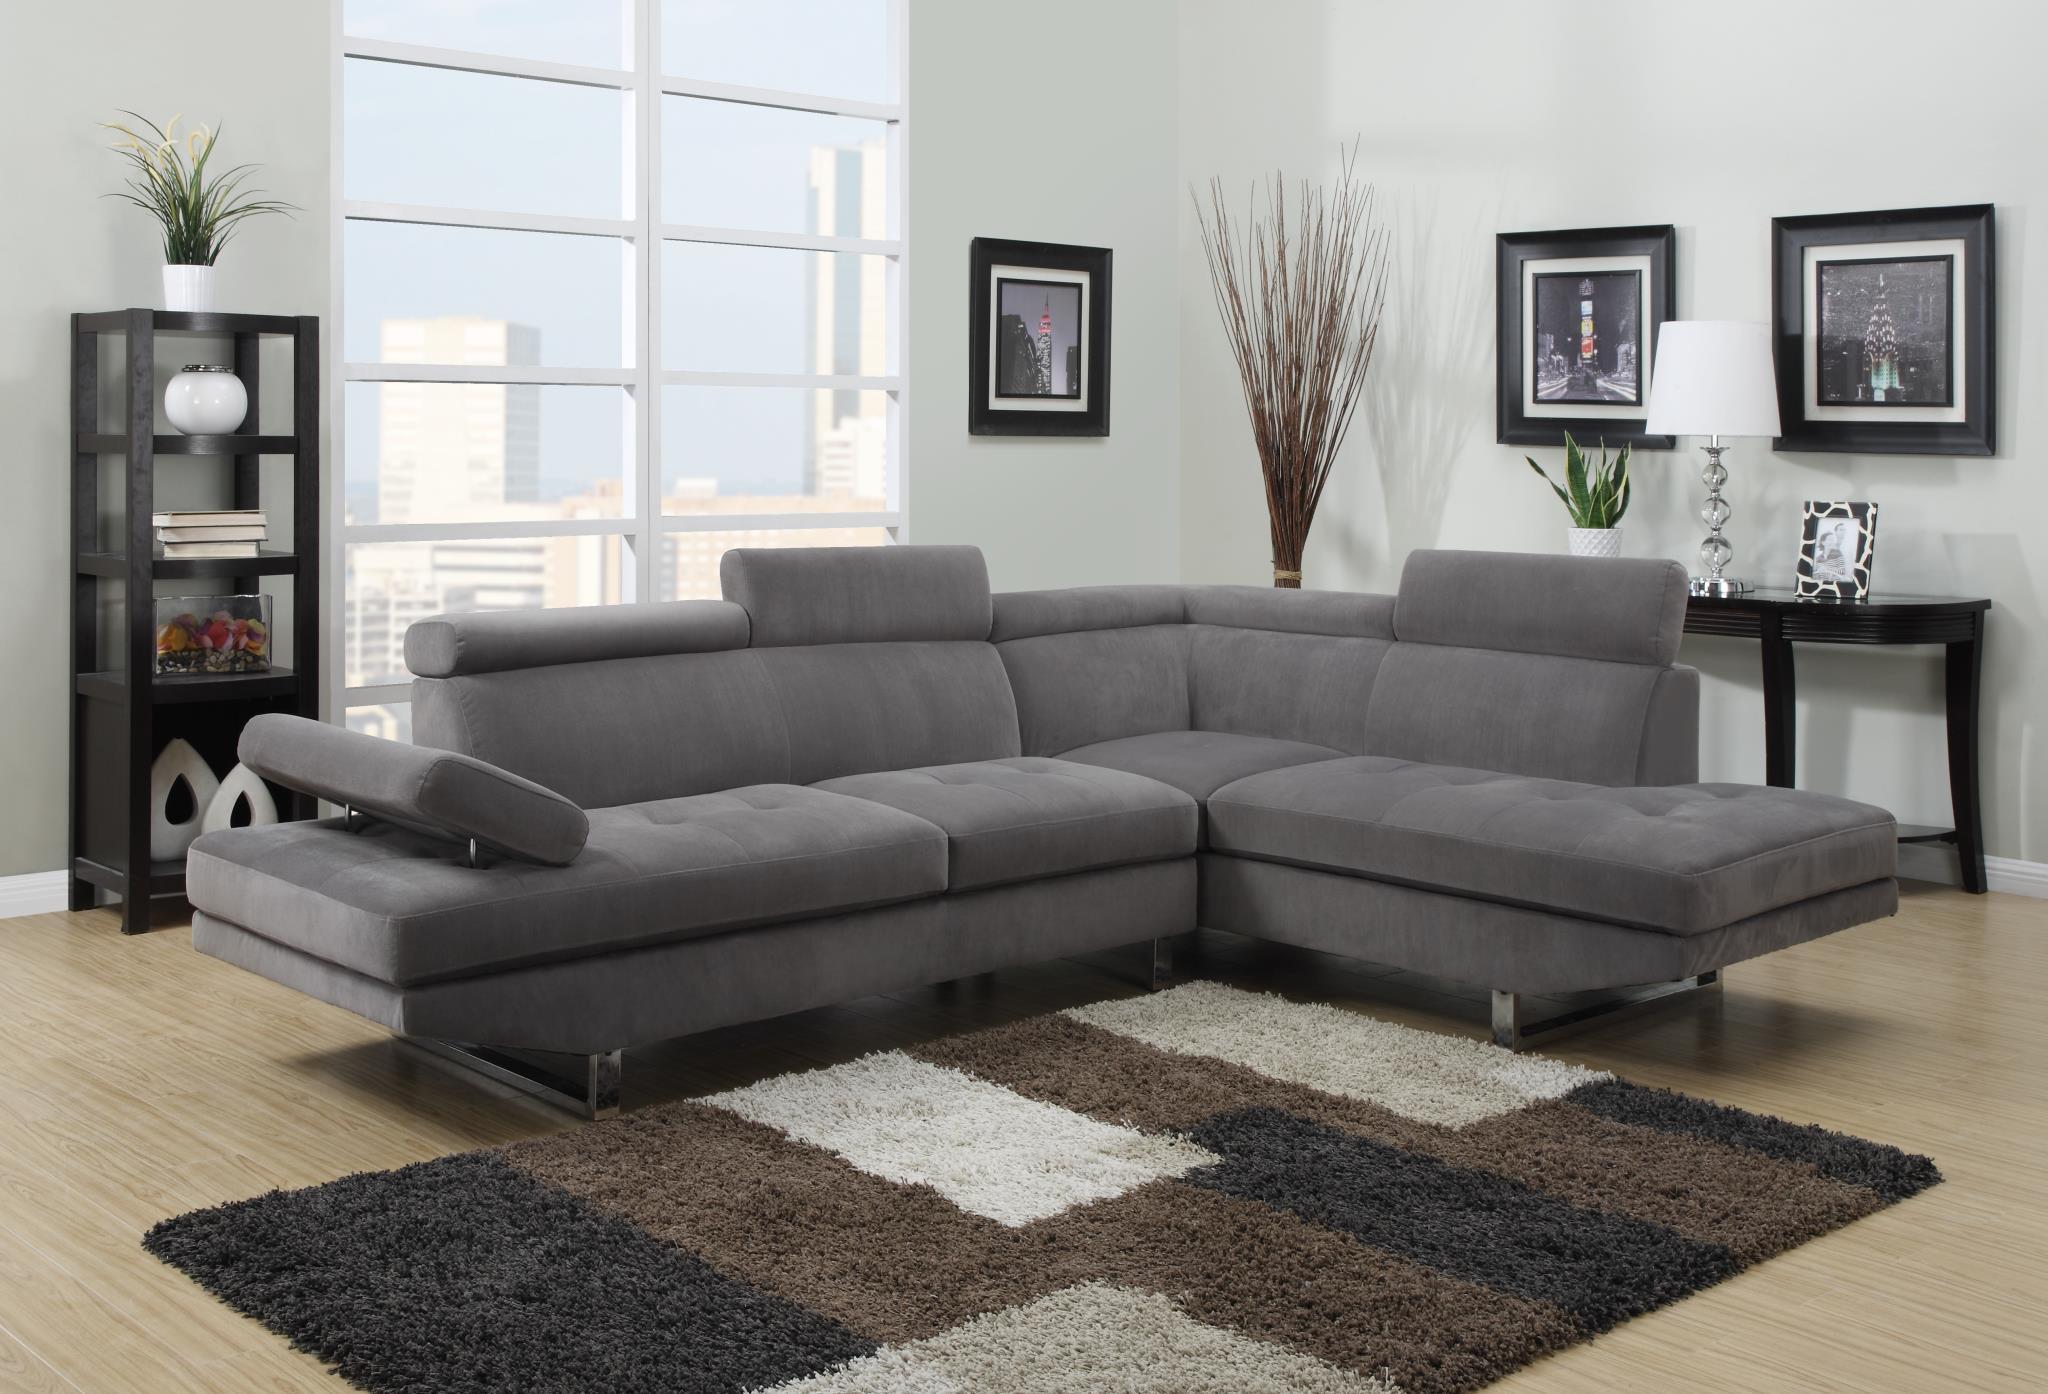 Classic, Traditional Sectional Corner Sofa Metairie 1051-SEC-GY in Grey Fabric